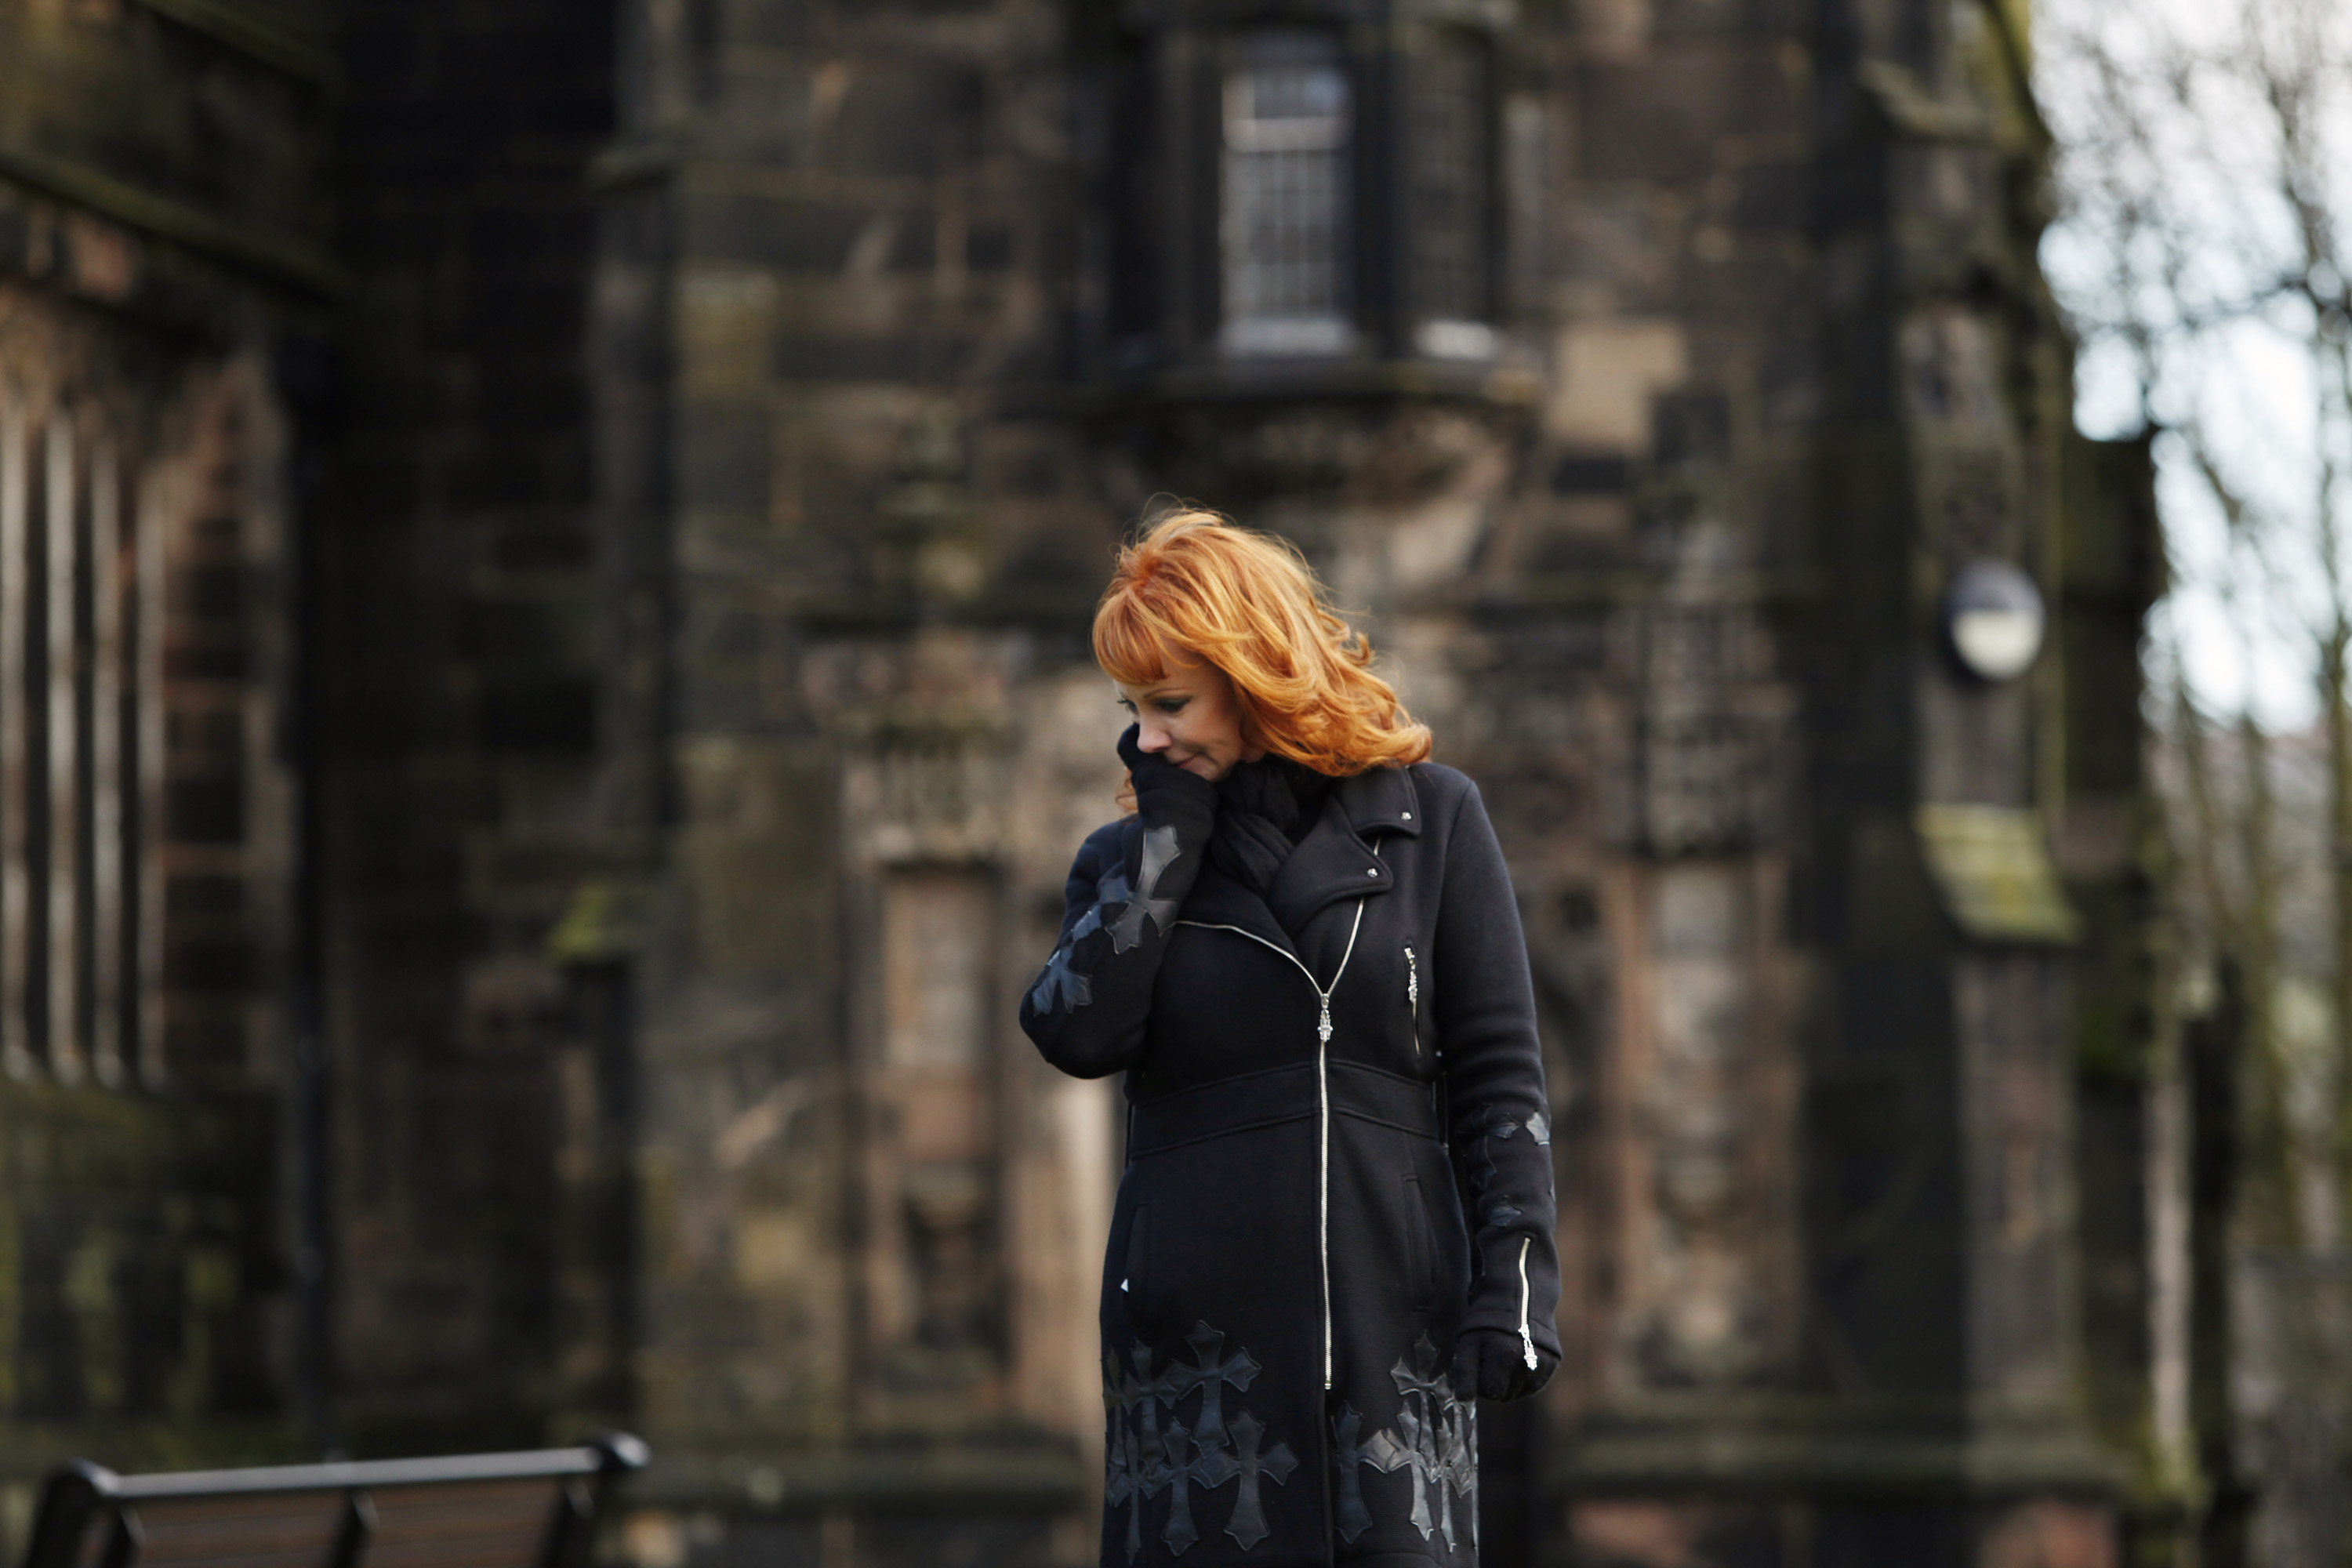 Reba McEntire in Macclesfield, England on 2011 | Source: Getty Images